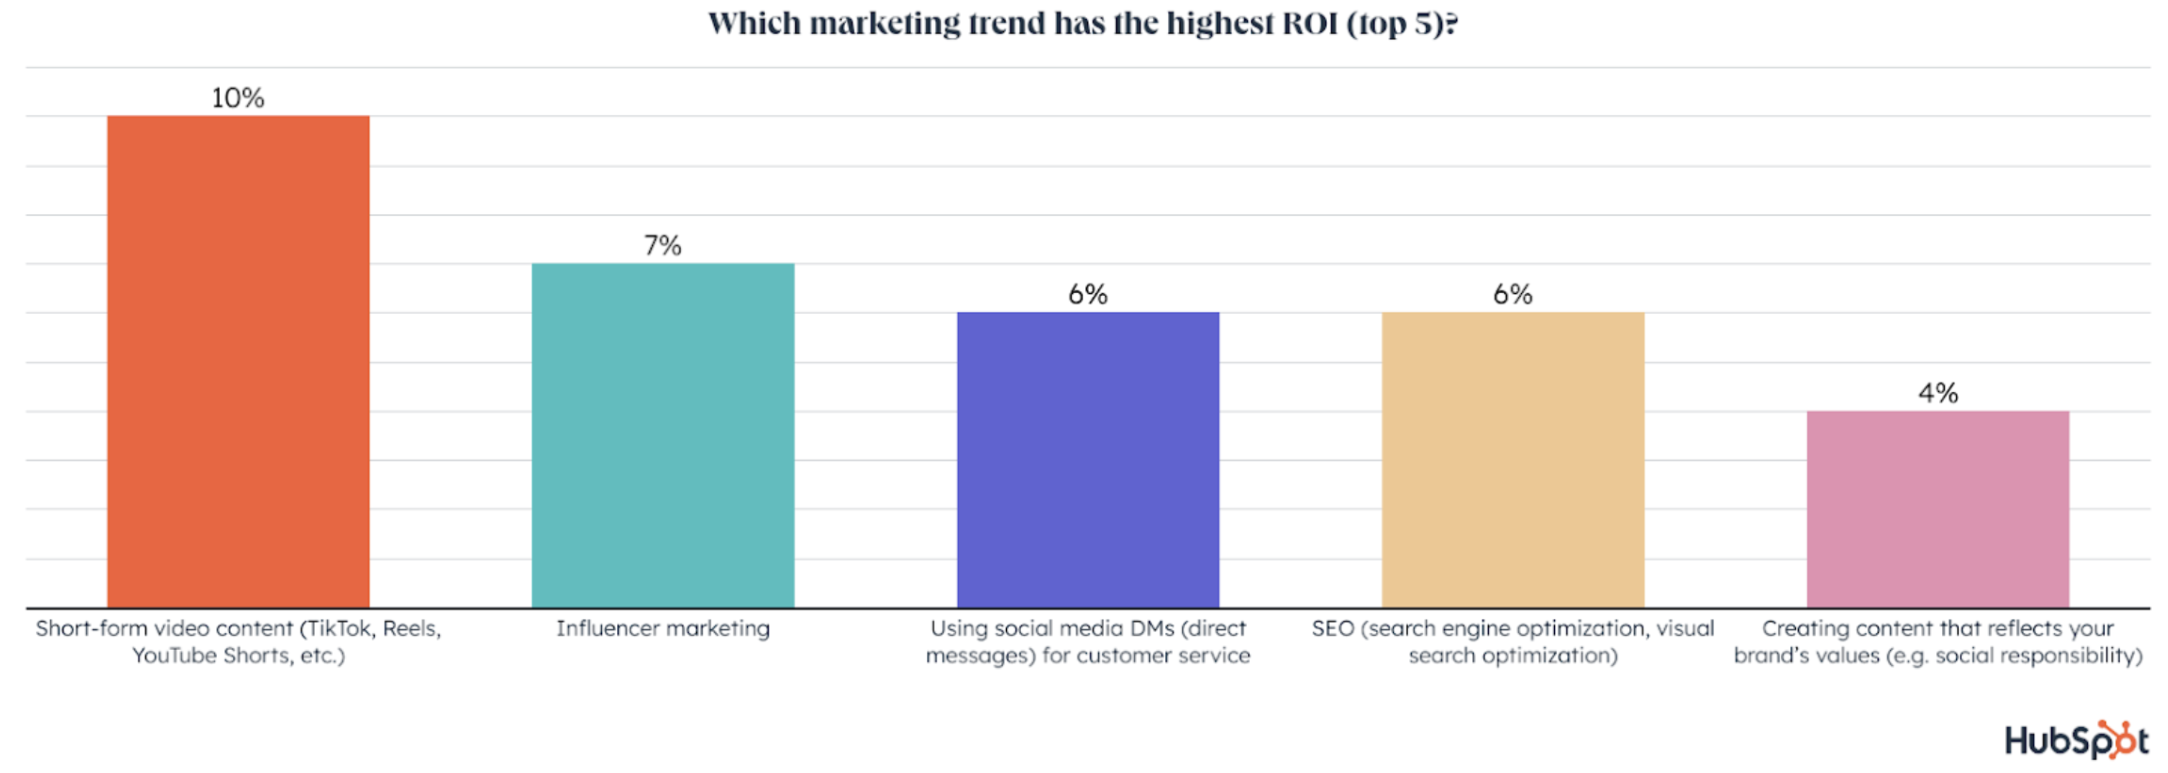 Graph showing which marketing trend has the highest ROI with short-form video content at number one.